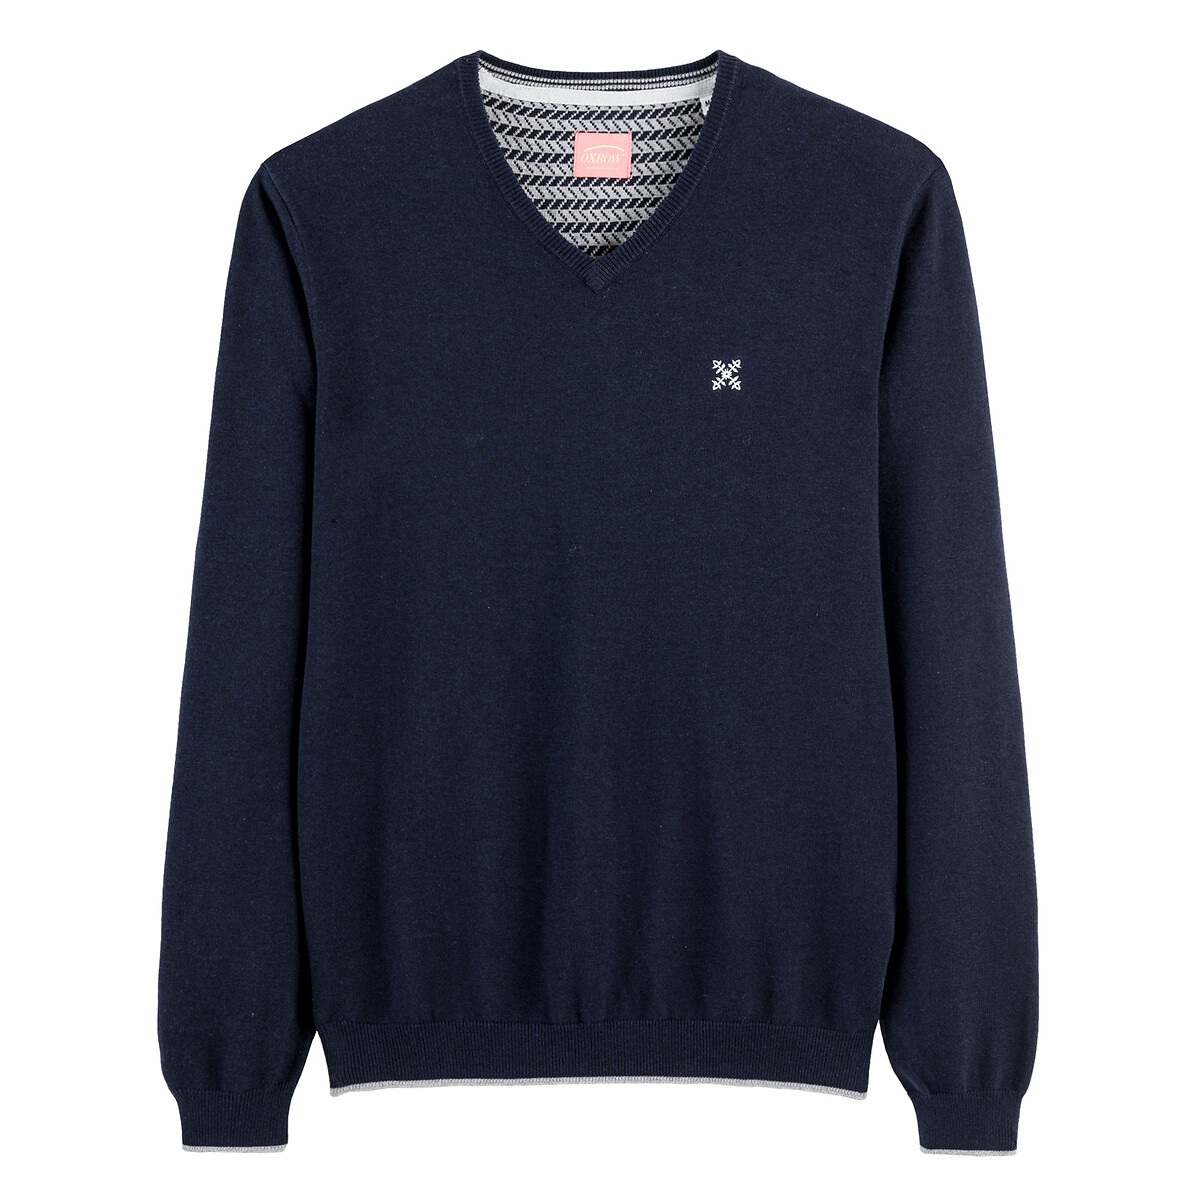 Cotton essential jumper with v-neck, navy blue, Oxbow | La Redoute